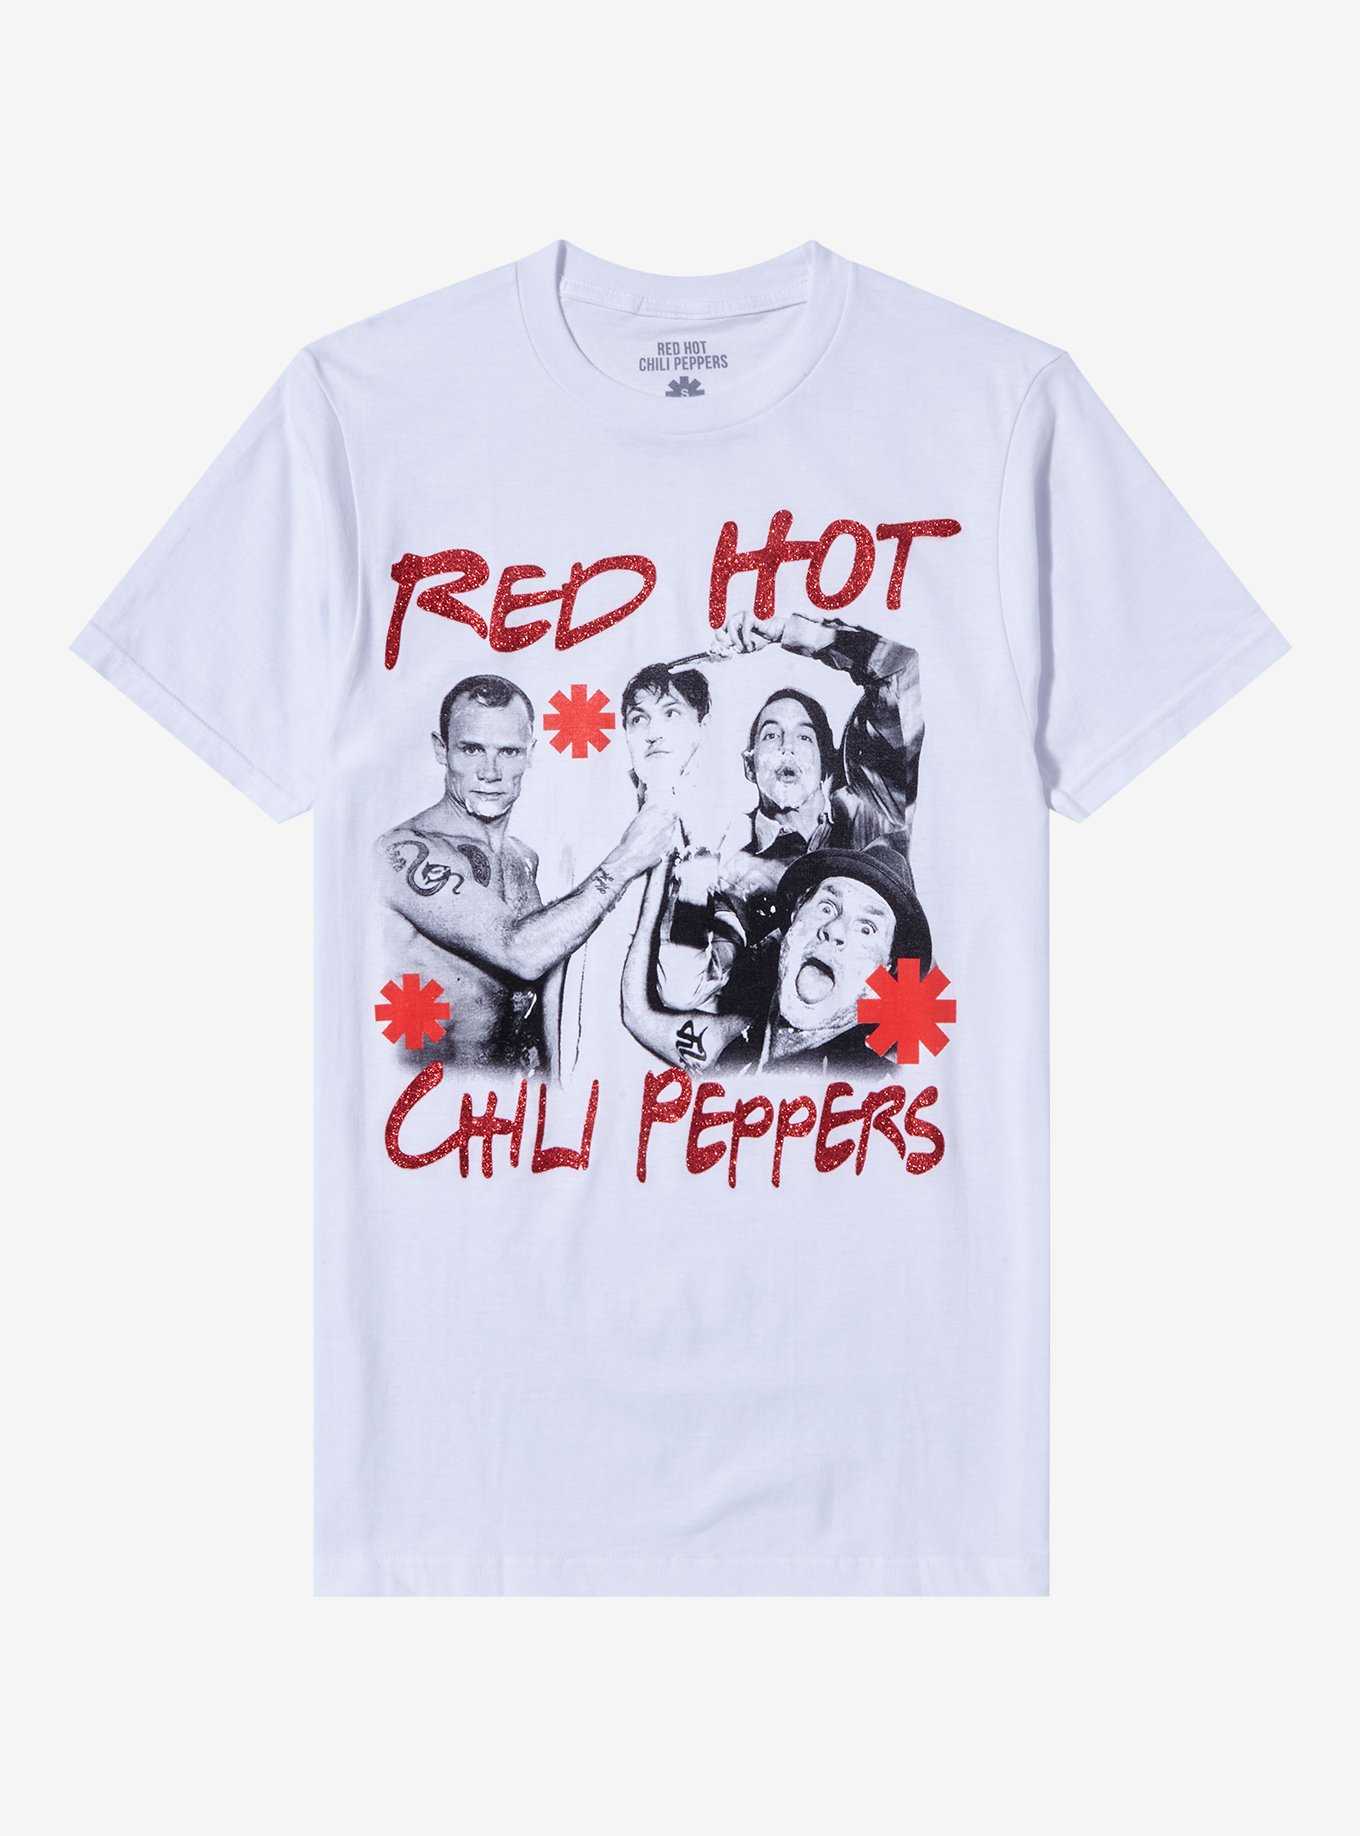 OFFICIAL Red Hot Chili Peppers | T-Shirts Topic Hot Merch 